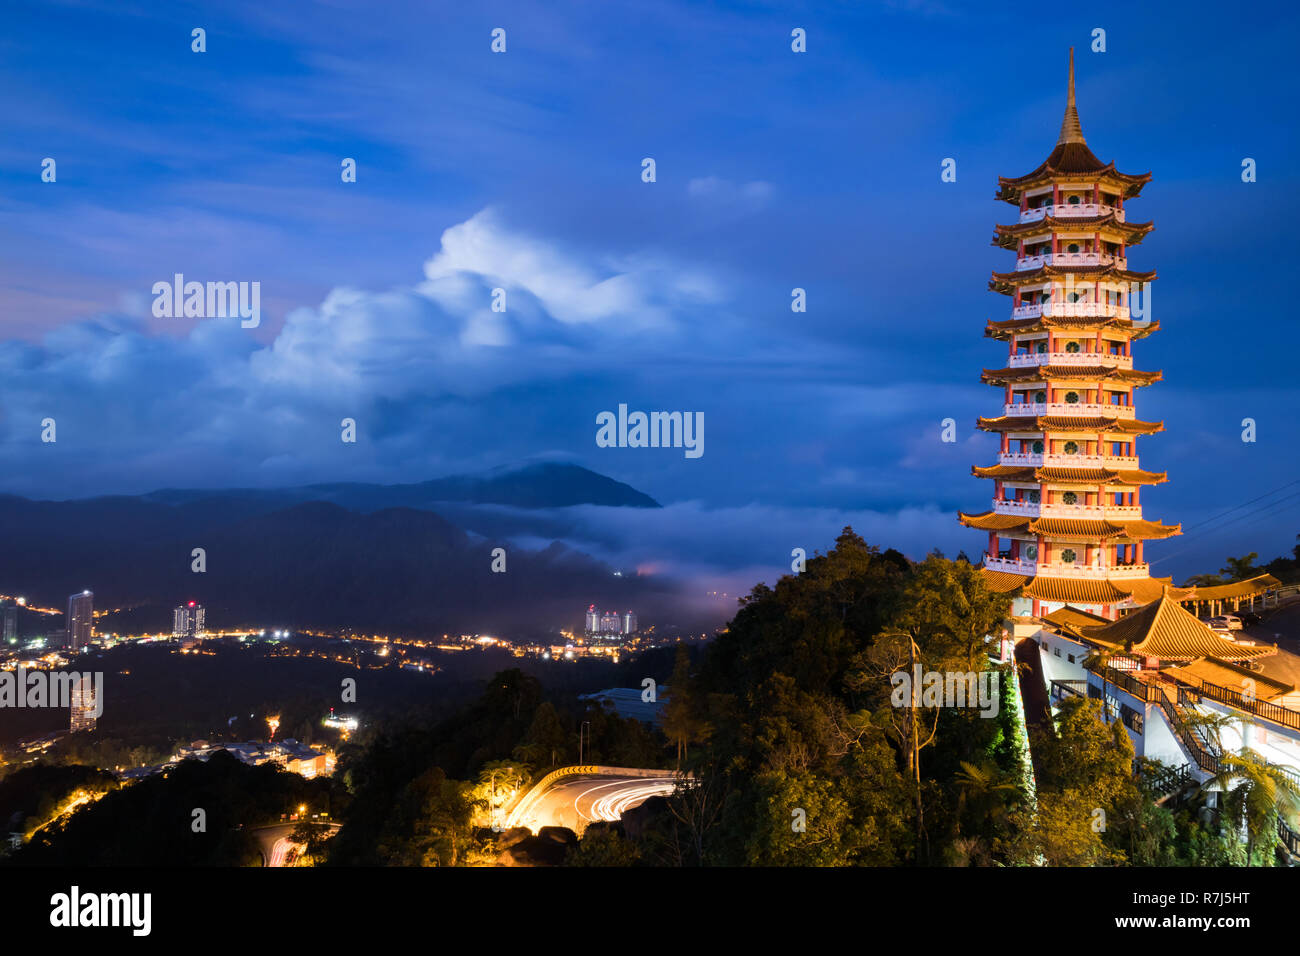 View of the Pagoda in the morning with low level cloud and hills in the background Stock Photo